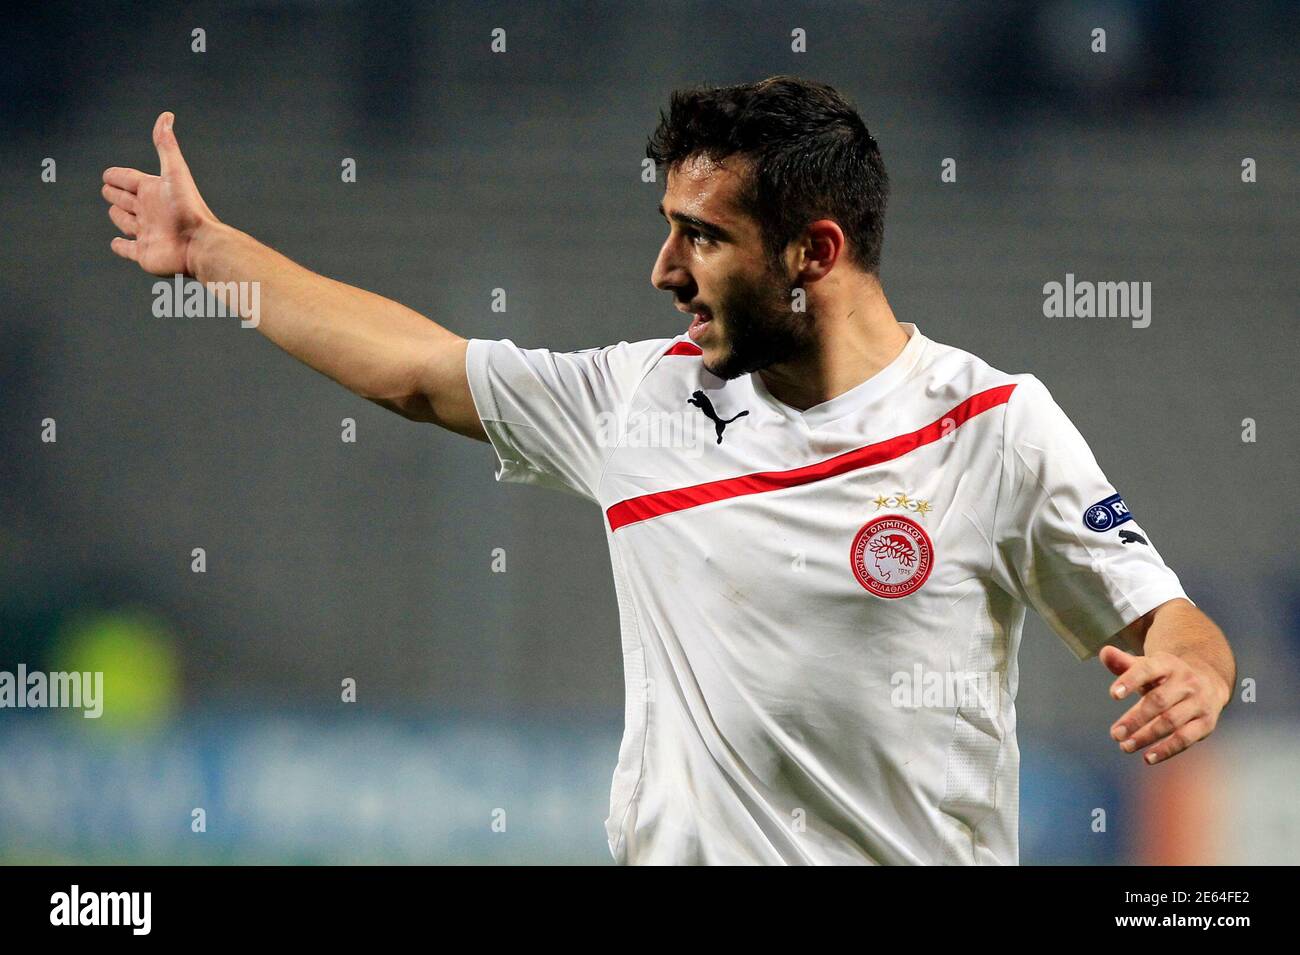 Giannis Fetfatzidis High Resolution Stock Photography and Images - Alamy